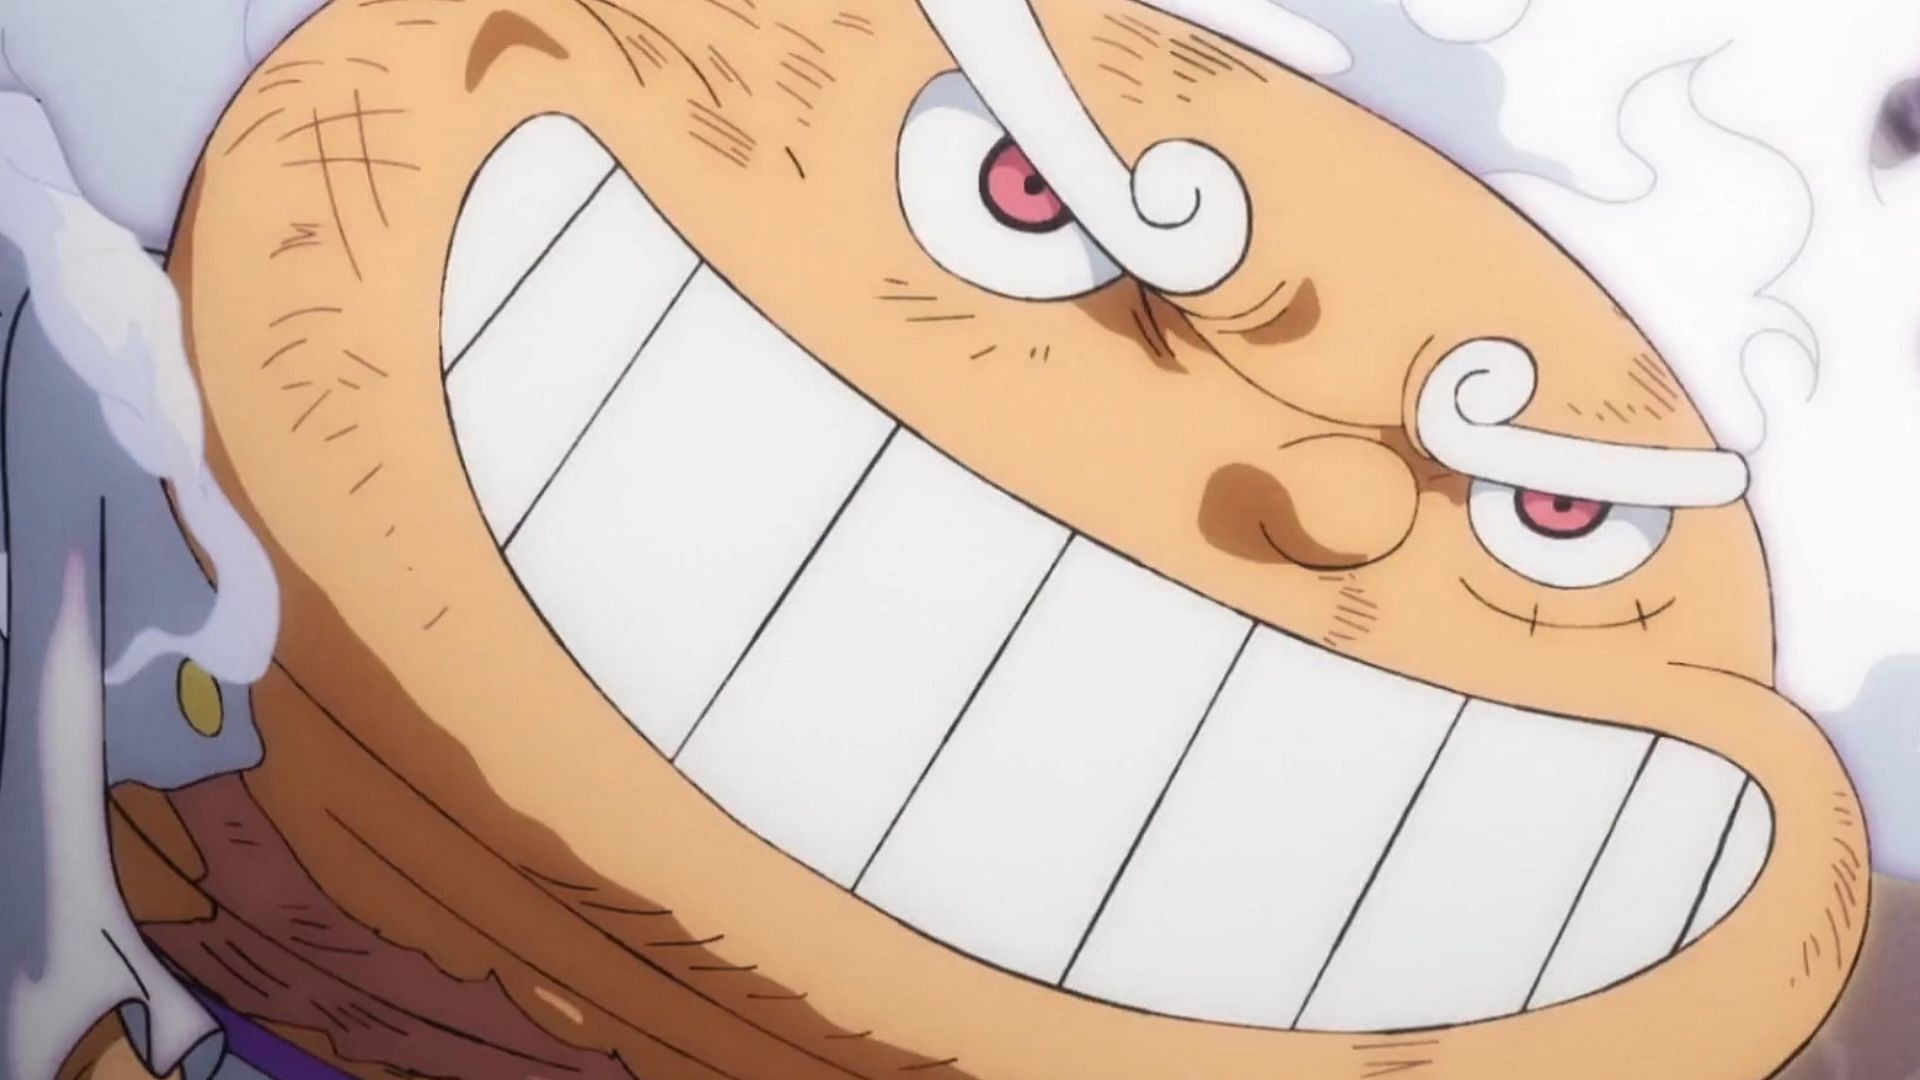 Gear 5 Luffy as seen in the preview for One Piece episode 1072 (Image via Toei Animation)